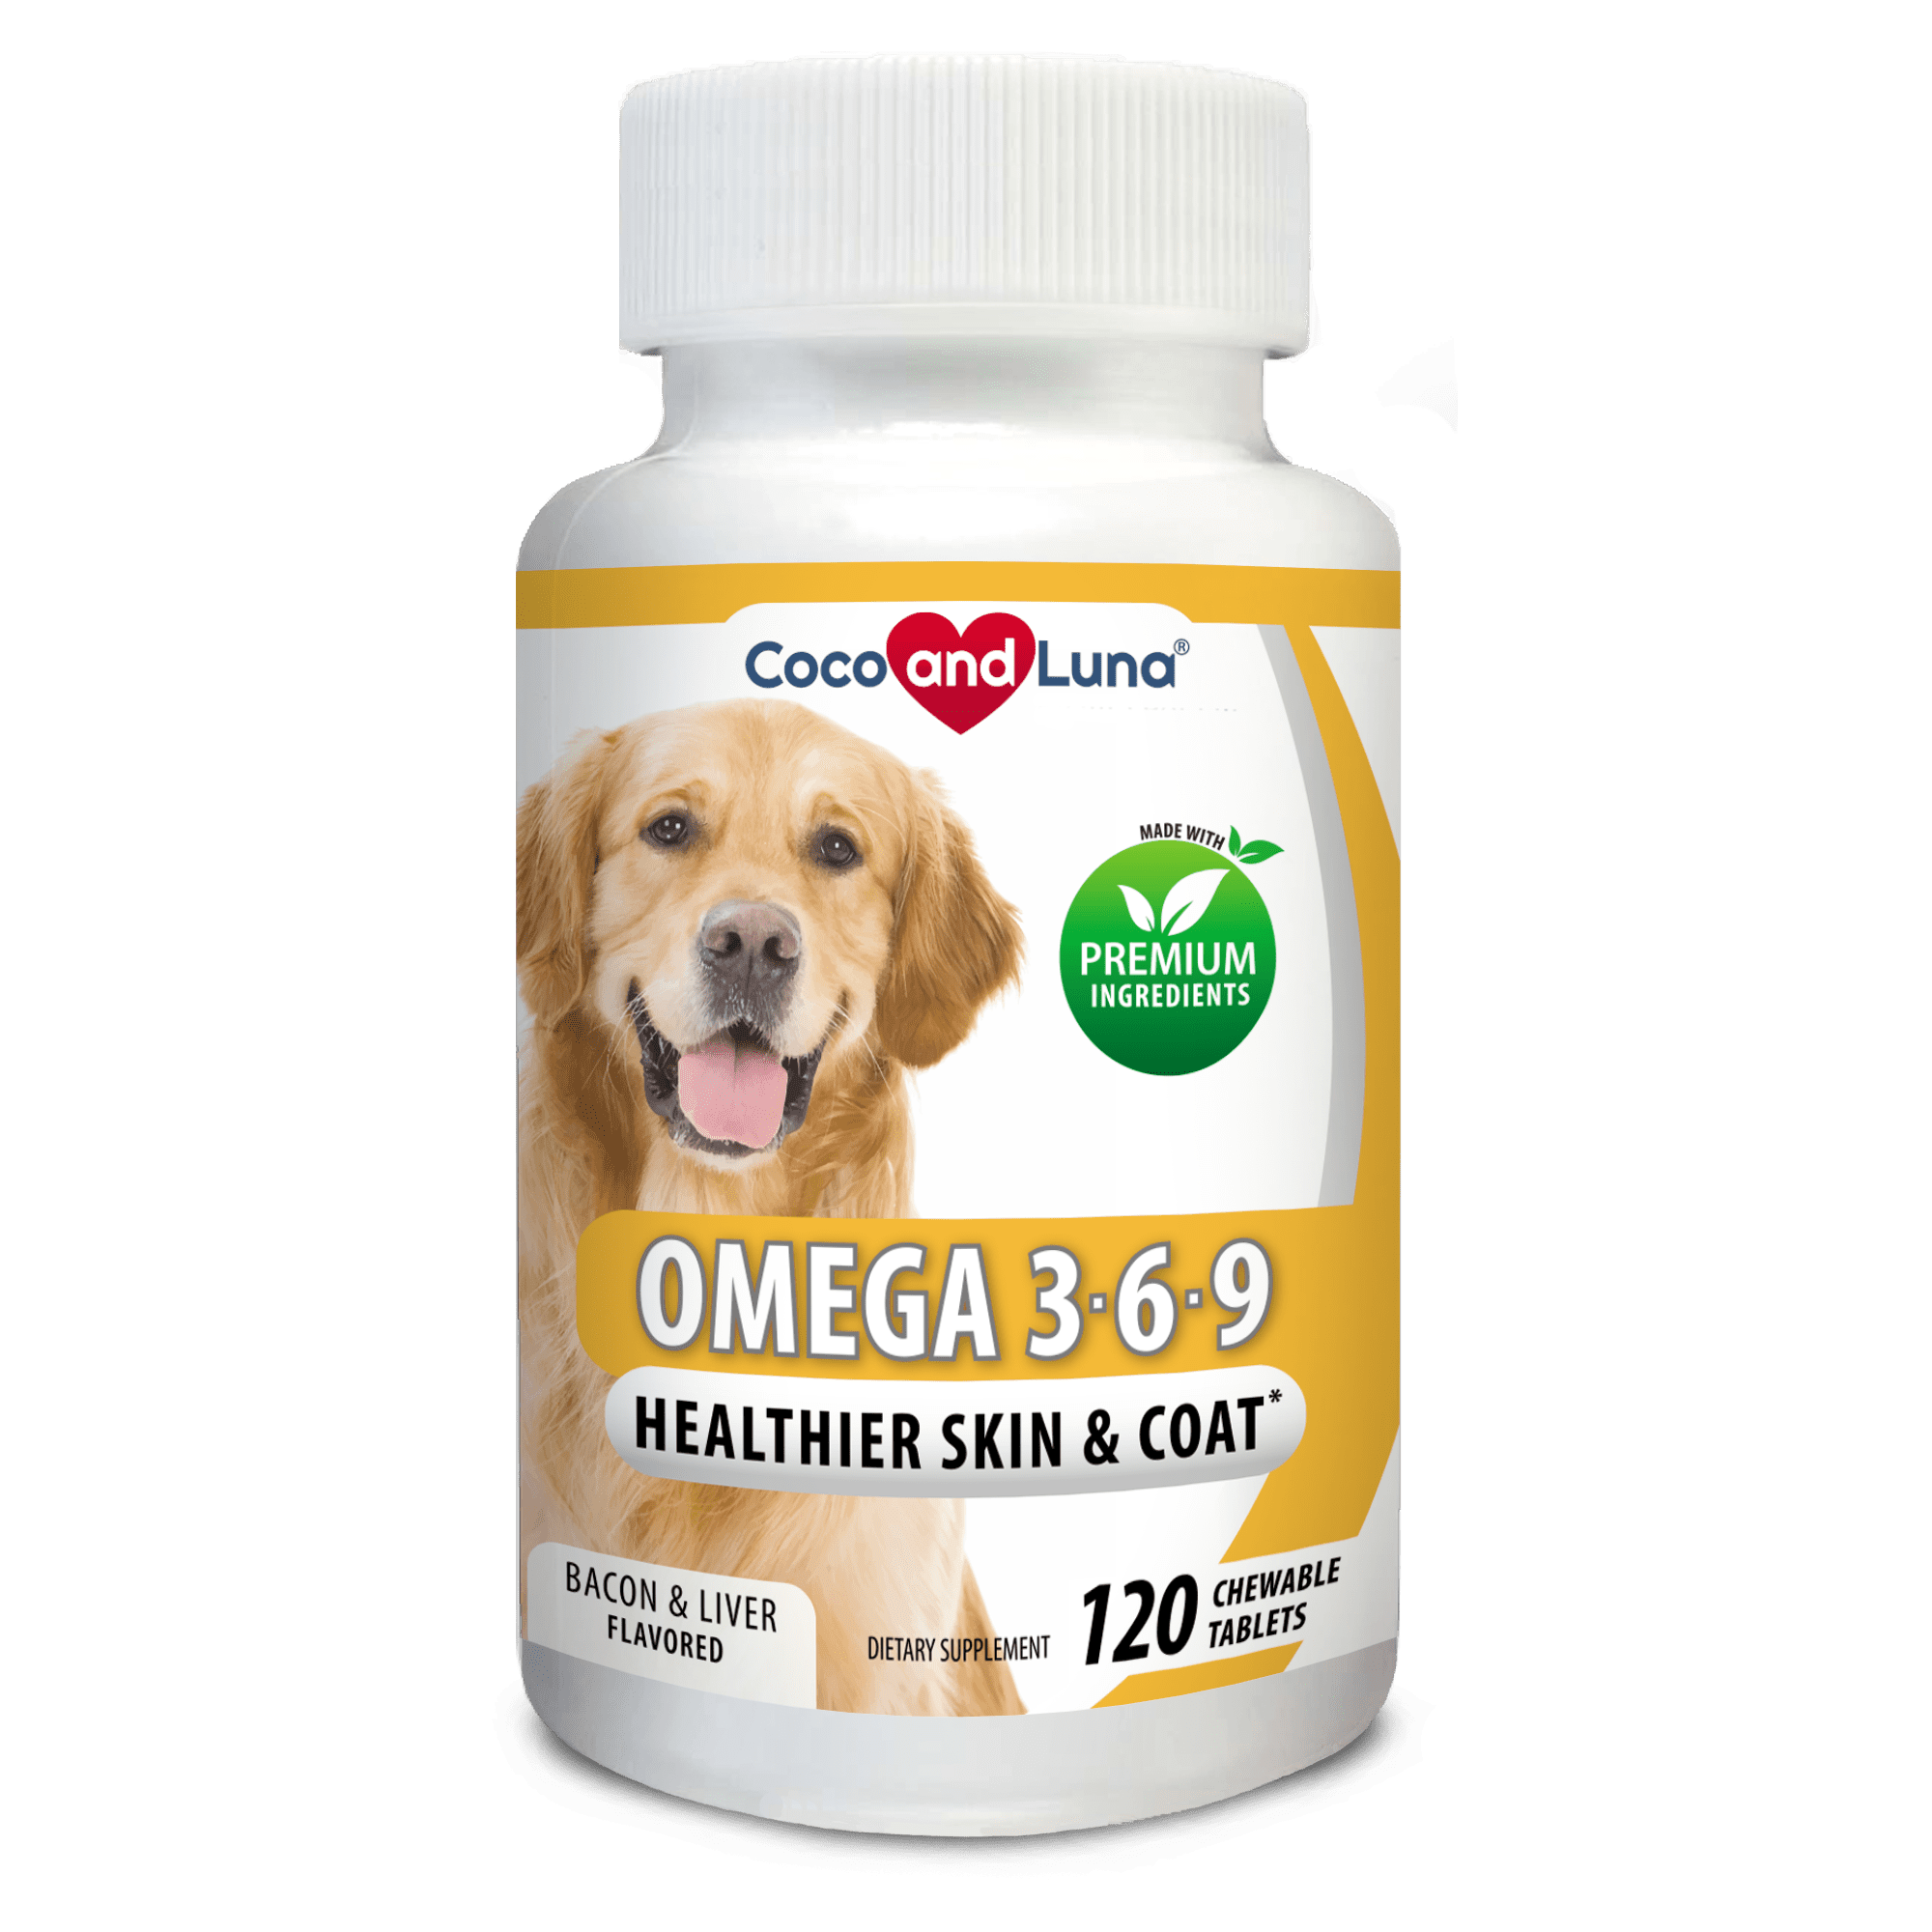 Omega 3 for Dogs - Salmon Oil for Dogs - Itch Relief, Allergy Support, Skin and Coat - 120